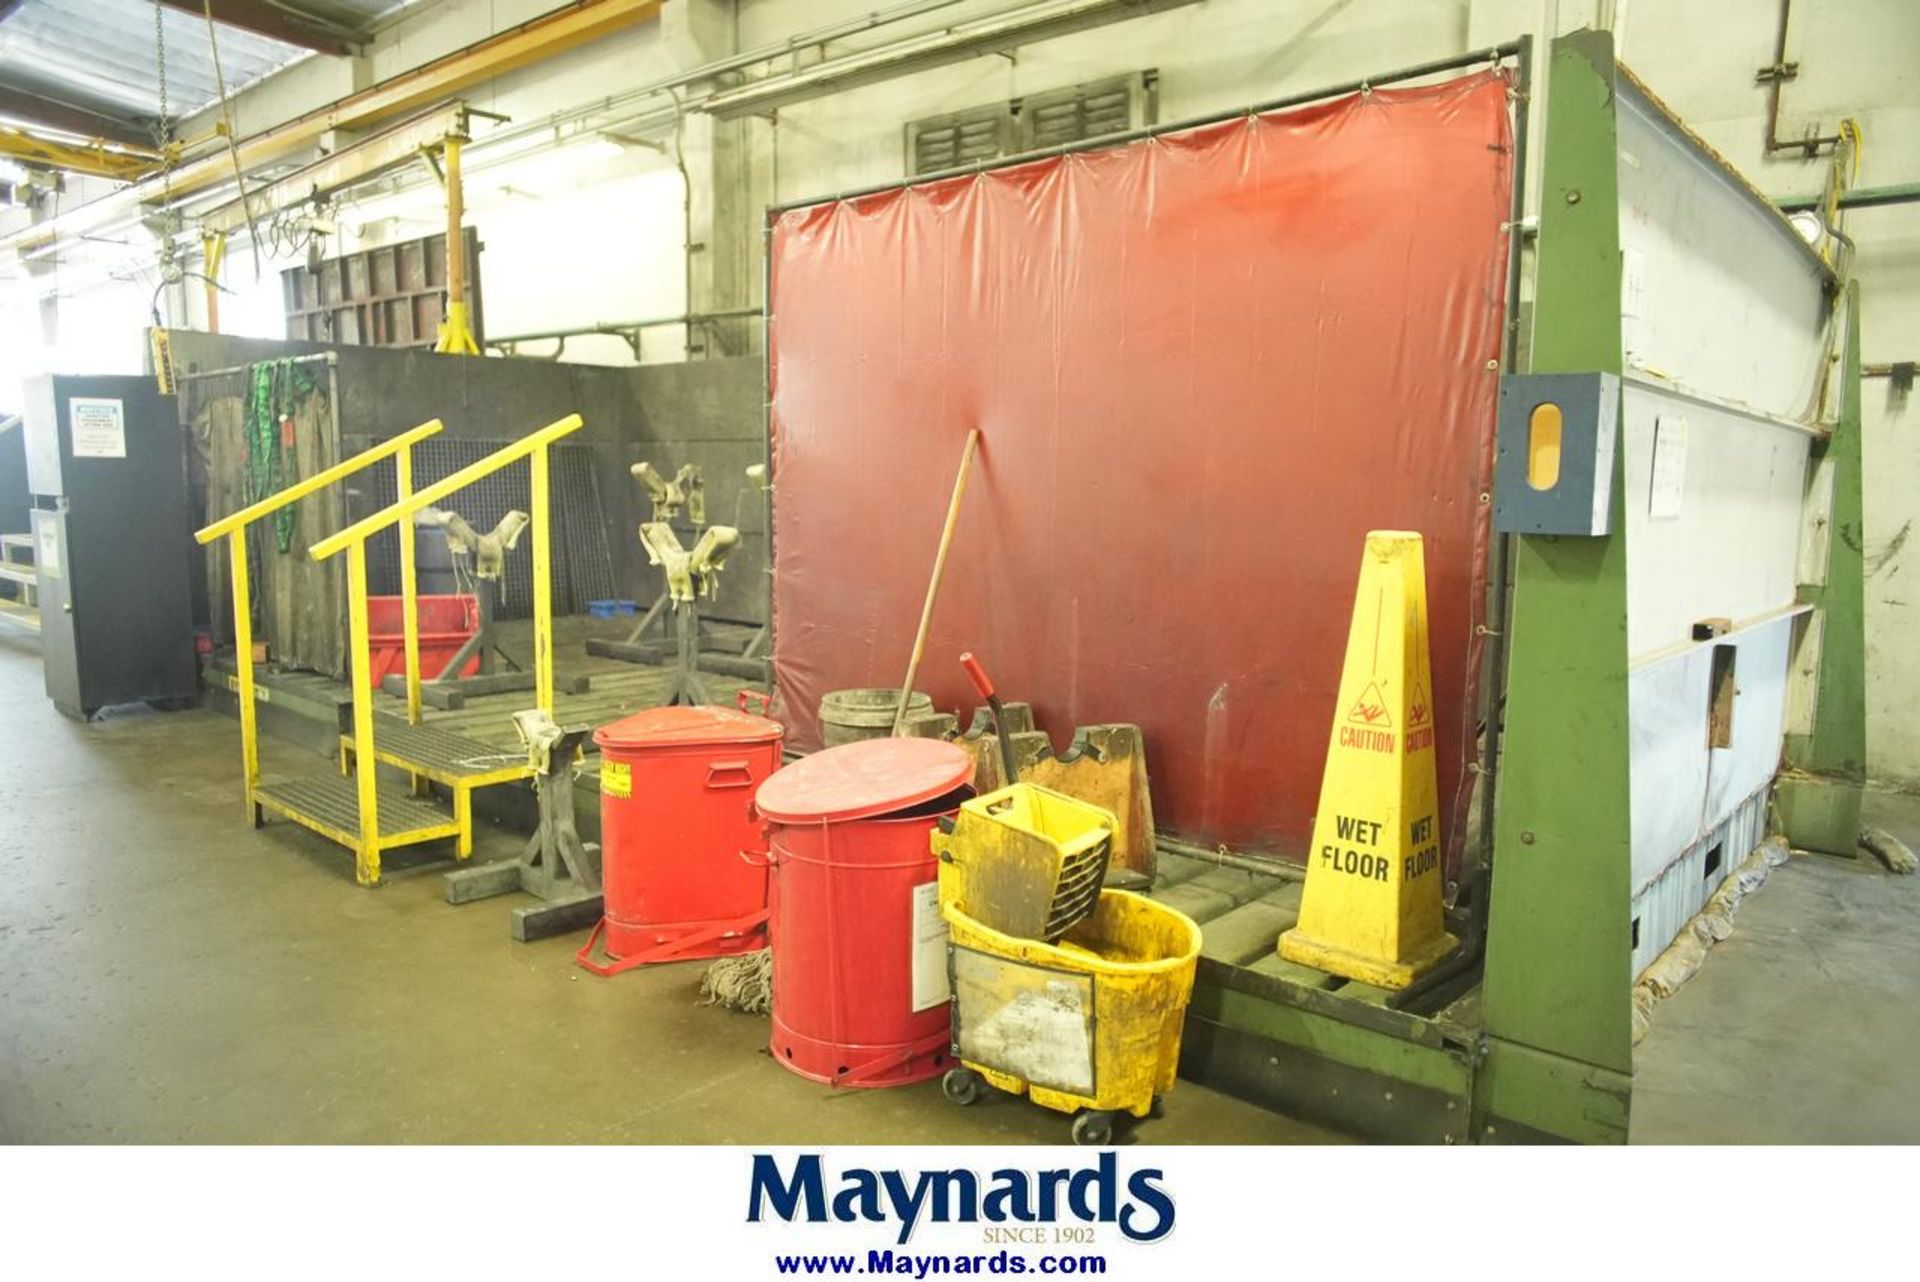 Hydro Engineering Hydropad Cleaning Booth (24' x 10' x 69" High Wall) - Image 3 of 6